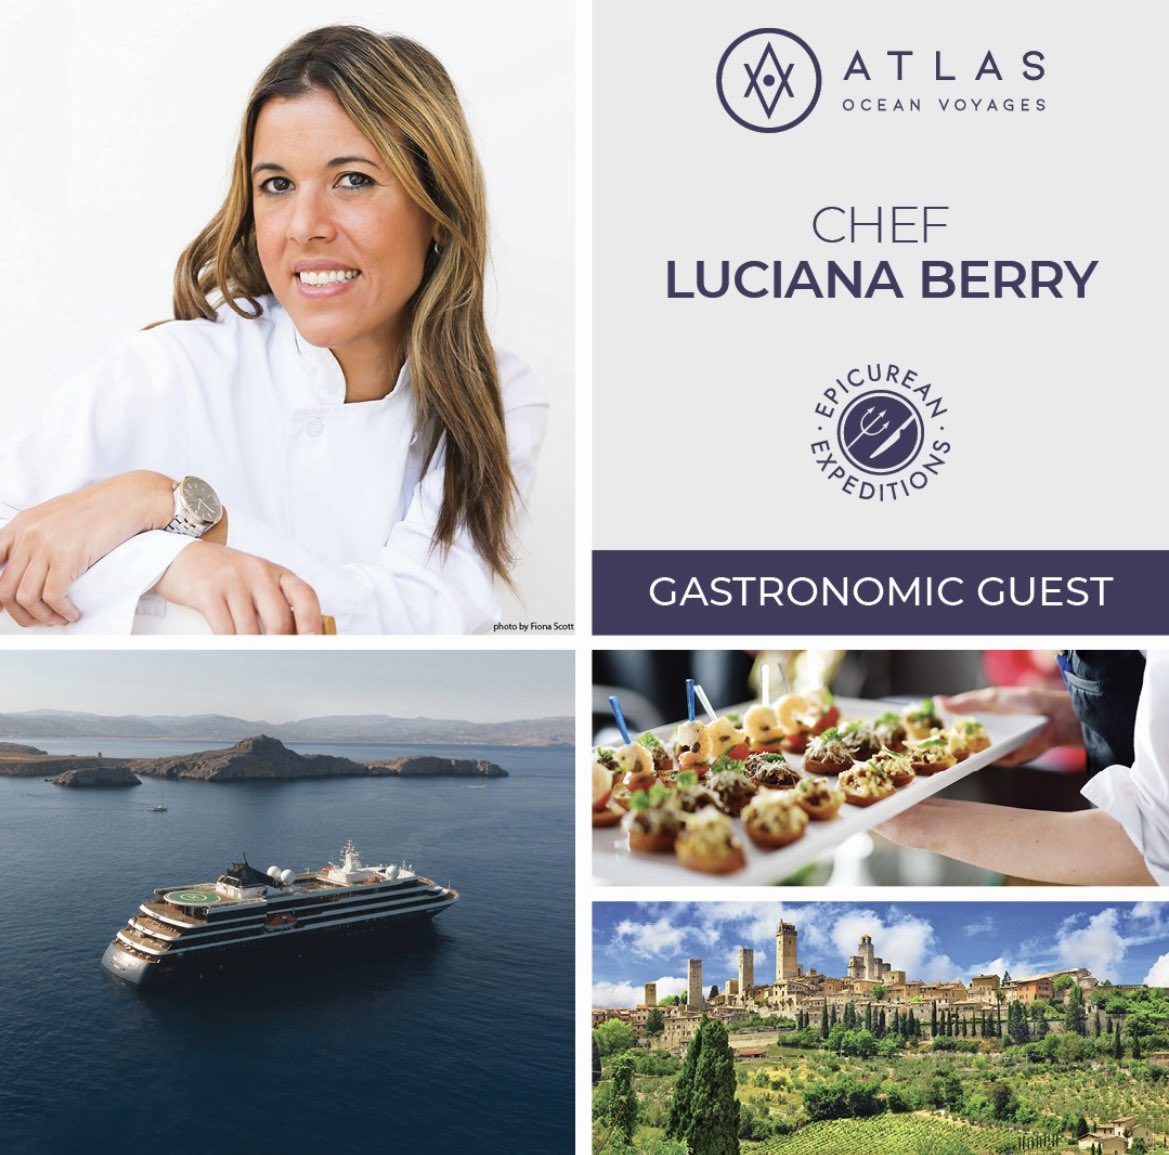 It is with great pleasure that I will be the guest chef in May for the @atlasoceanvoyages Cruise in the Mediterranean passing through the Monaco Grand Prix. Brazilian gastronomy now on the high seas.